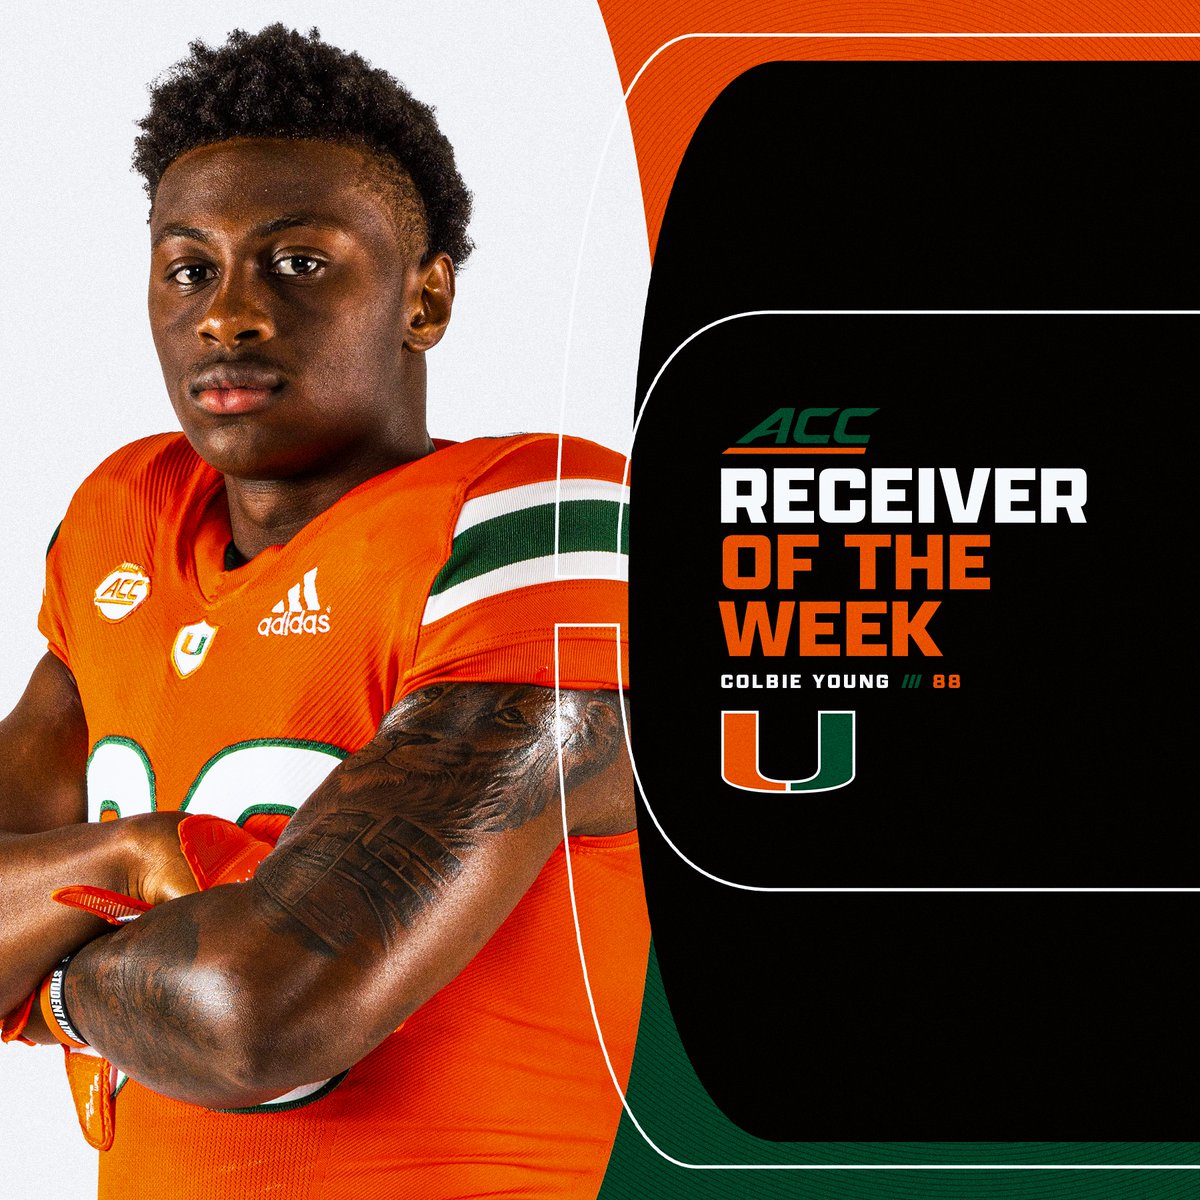 Colbie Young has been named @ACCFootball Receiver of the Week. He totaled six catches for 127 yards and two touchdowns against Duke on Saturday. More: canes.news/3CZRGc9